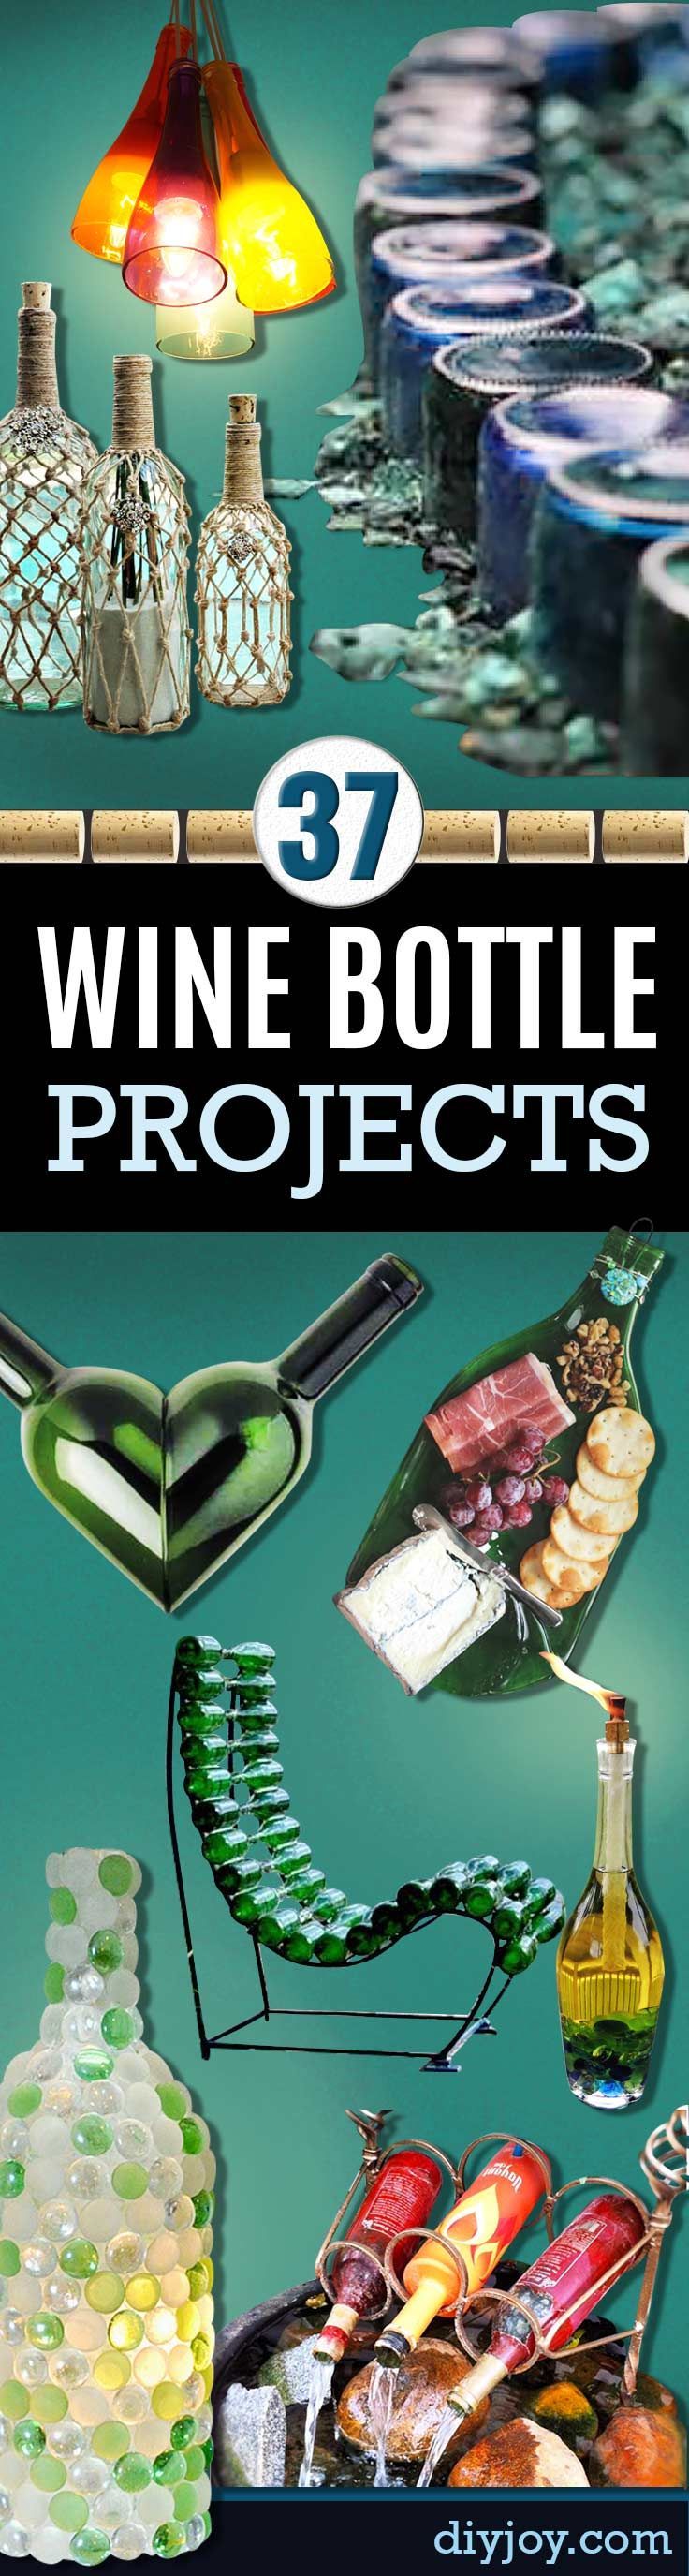 DIY Wine Bottle Crafts - Craft Projects for Lights, Decoration, Gift Ideas, Wedd...